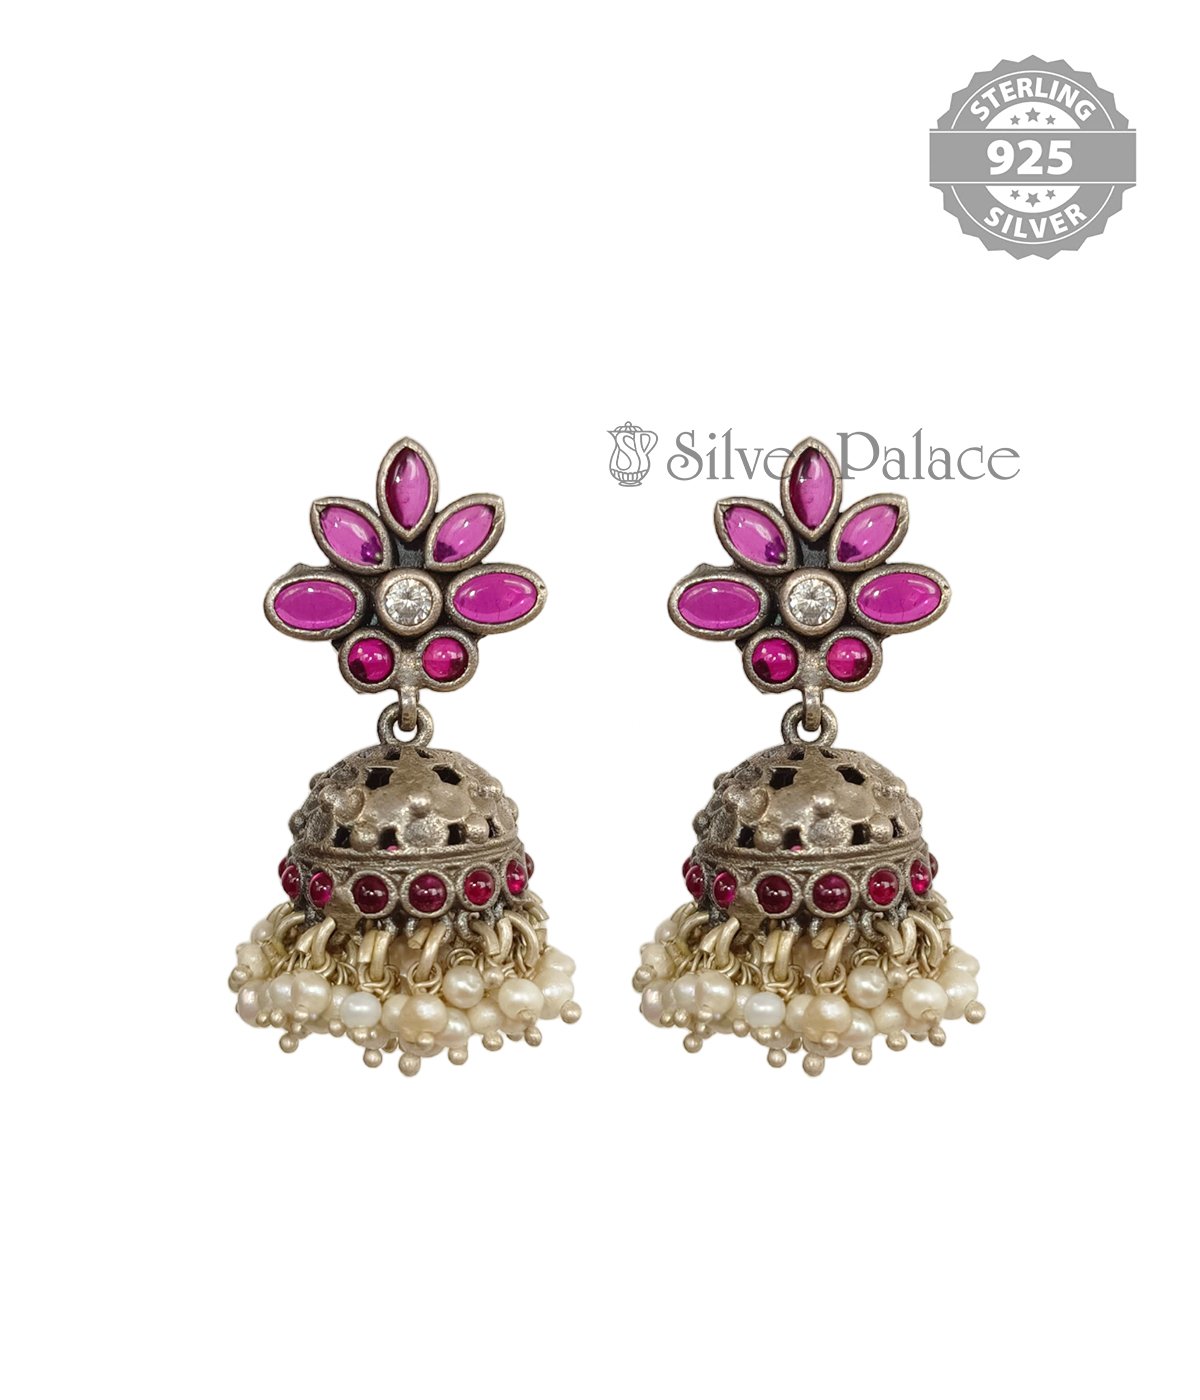 92.5 STERLING SILVER PINK STONE FLORAL JHUMKAS FOR KIDS